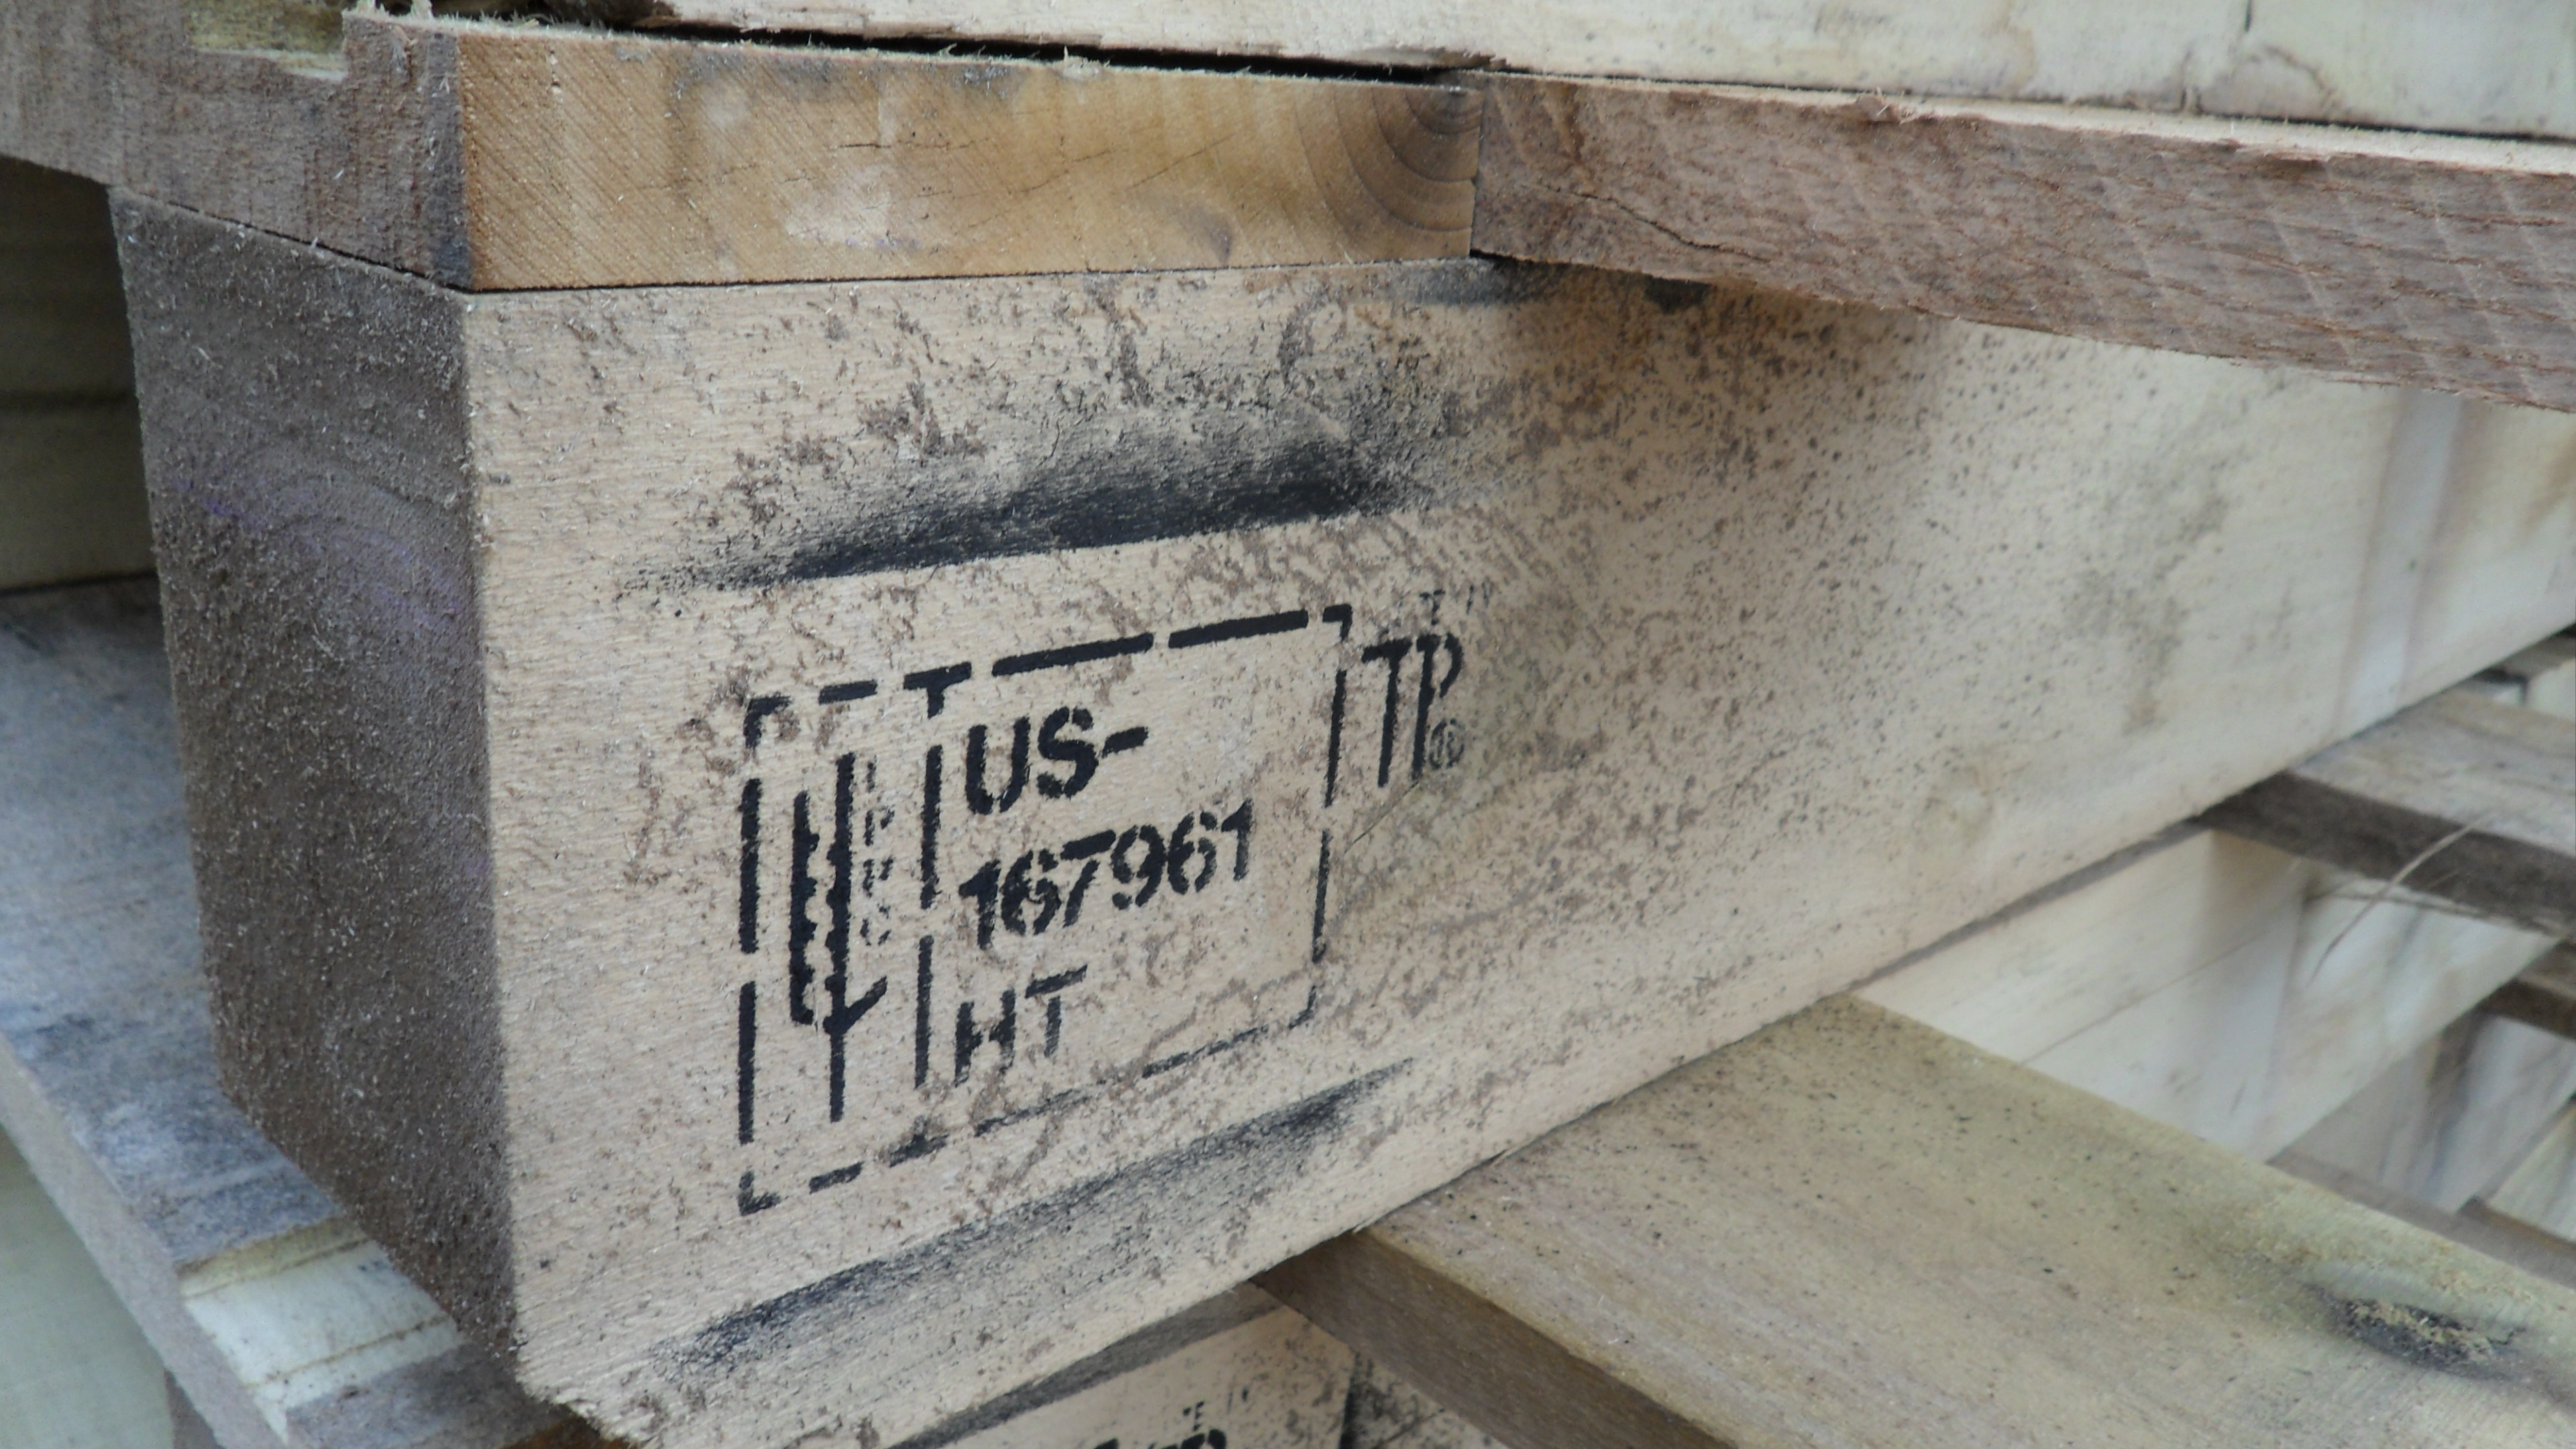 Photo of a stamp showing a pallet's country of origin